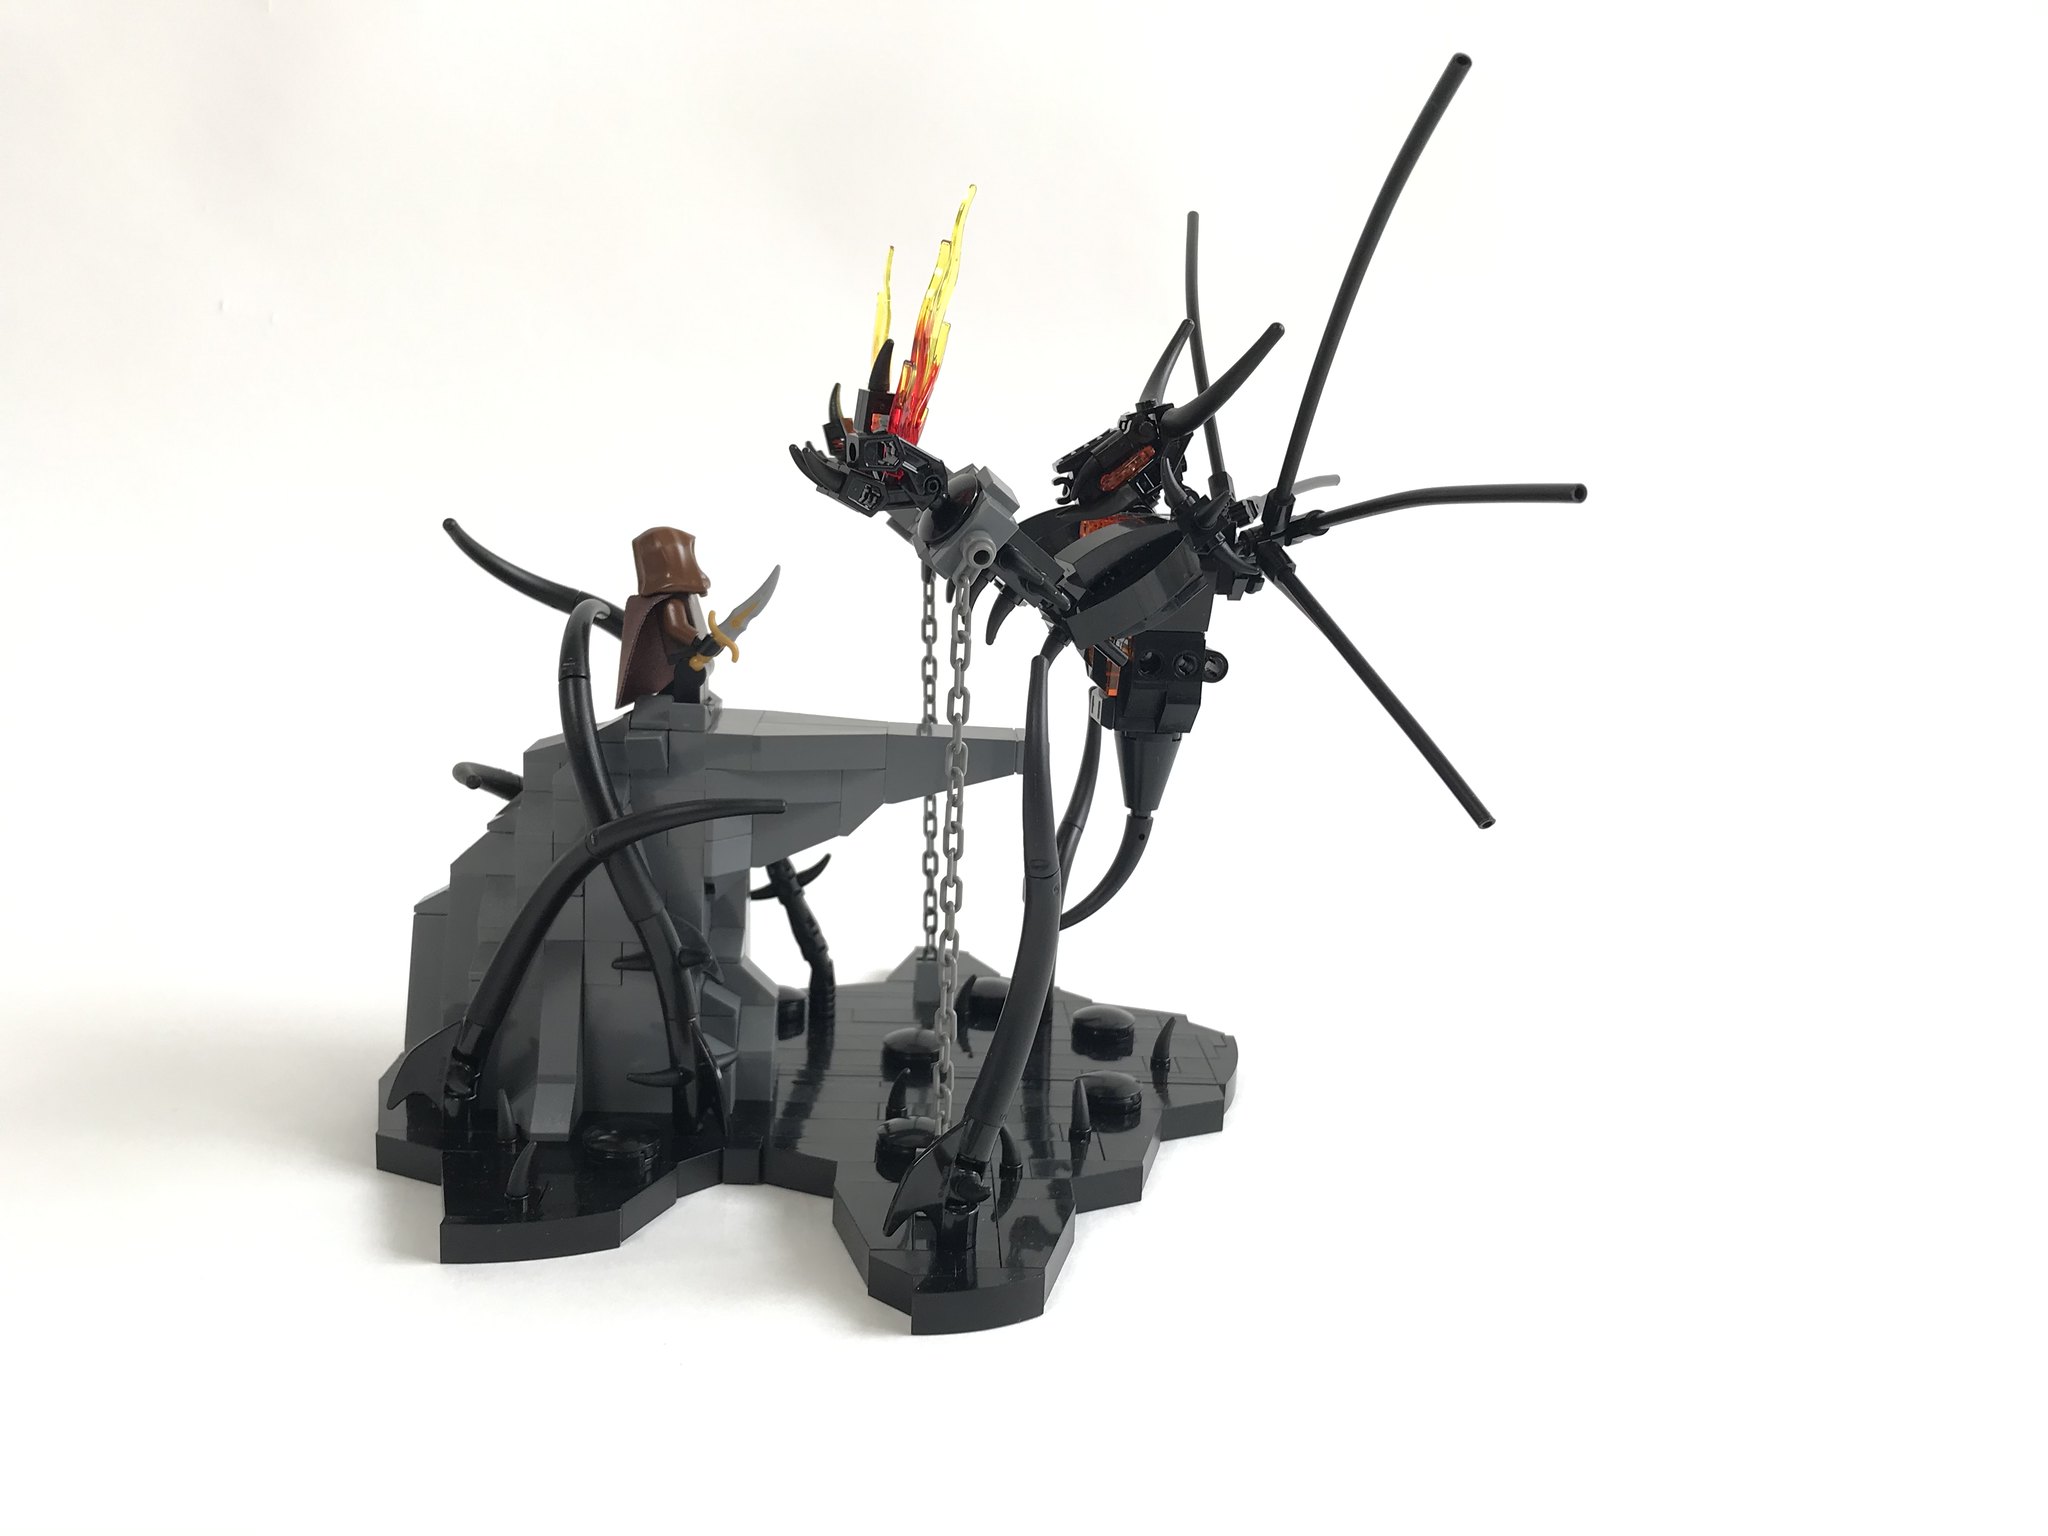 LEGO tensegrity sculpture of a demon suspended by only chains. A light brick was used for the glowing effect in the chest.